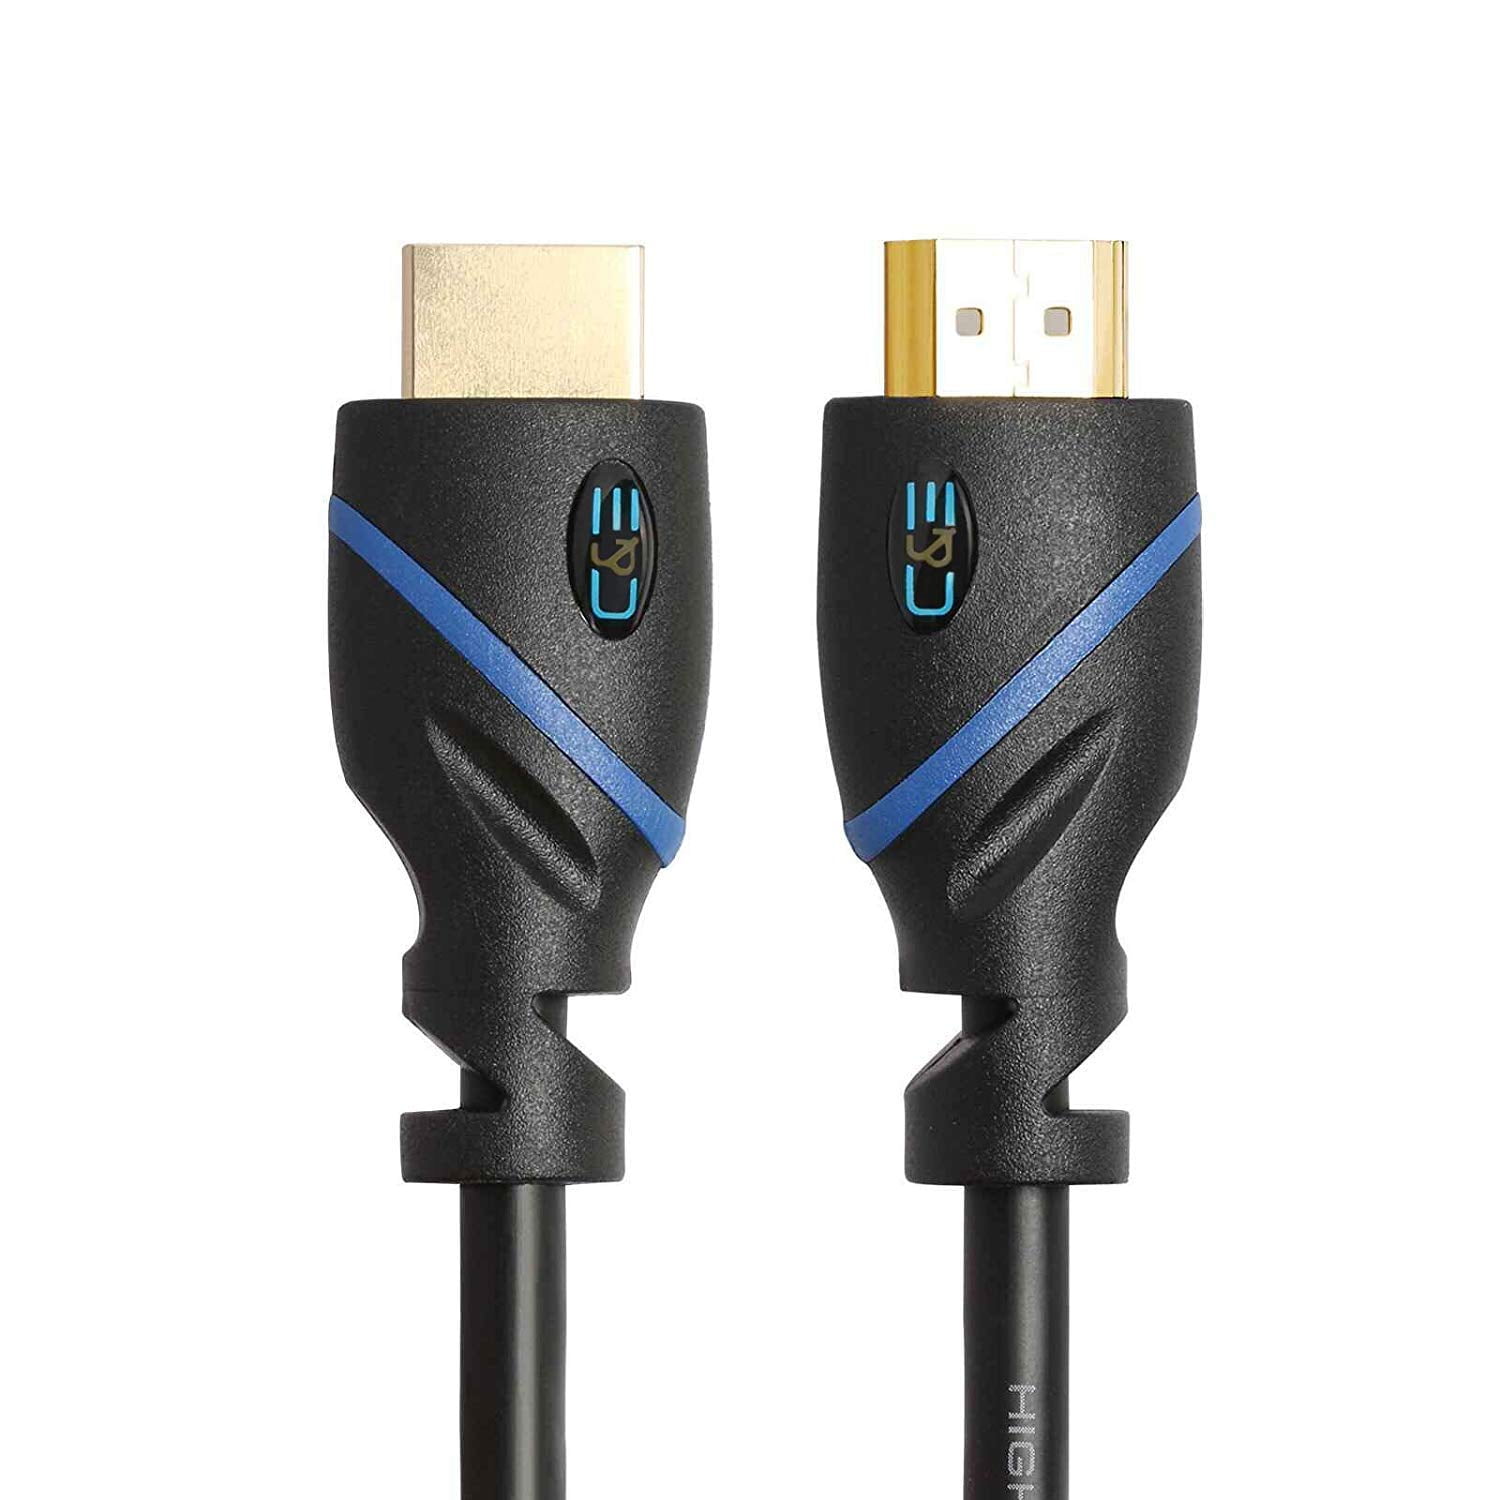 HDMI High Speed 3DTV 1.4 Cable Sky/PS3/TV Screened Lead 1m/2m/3m/5m/10m Meter 